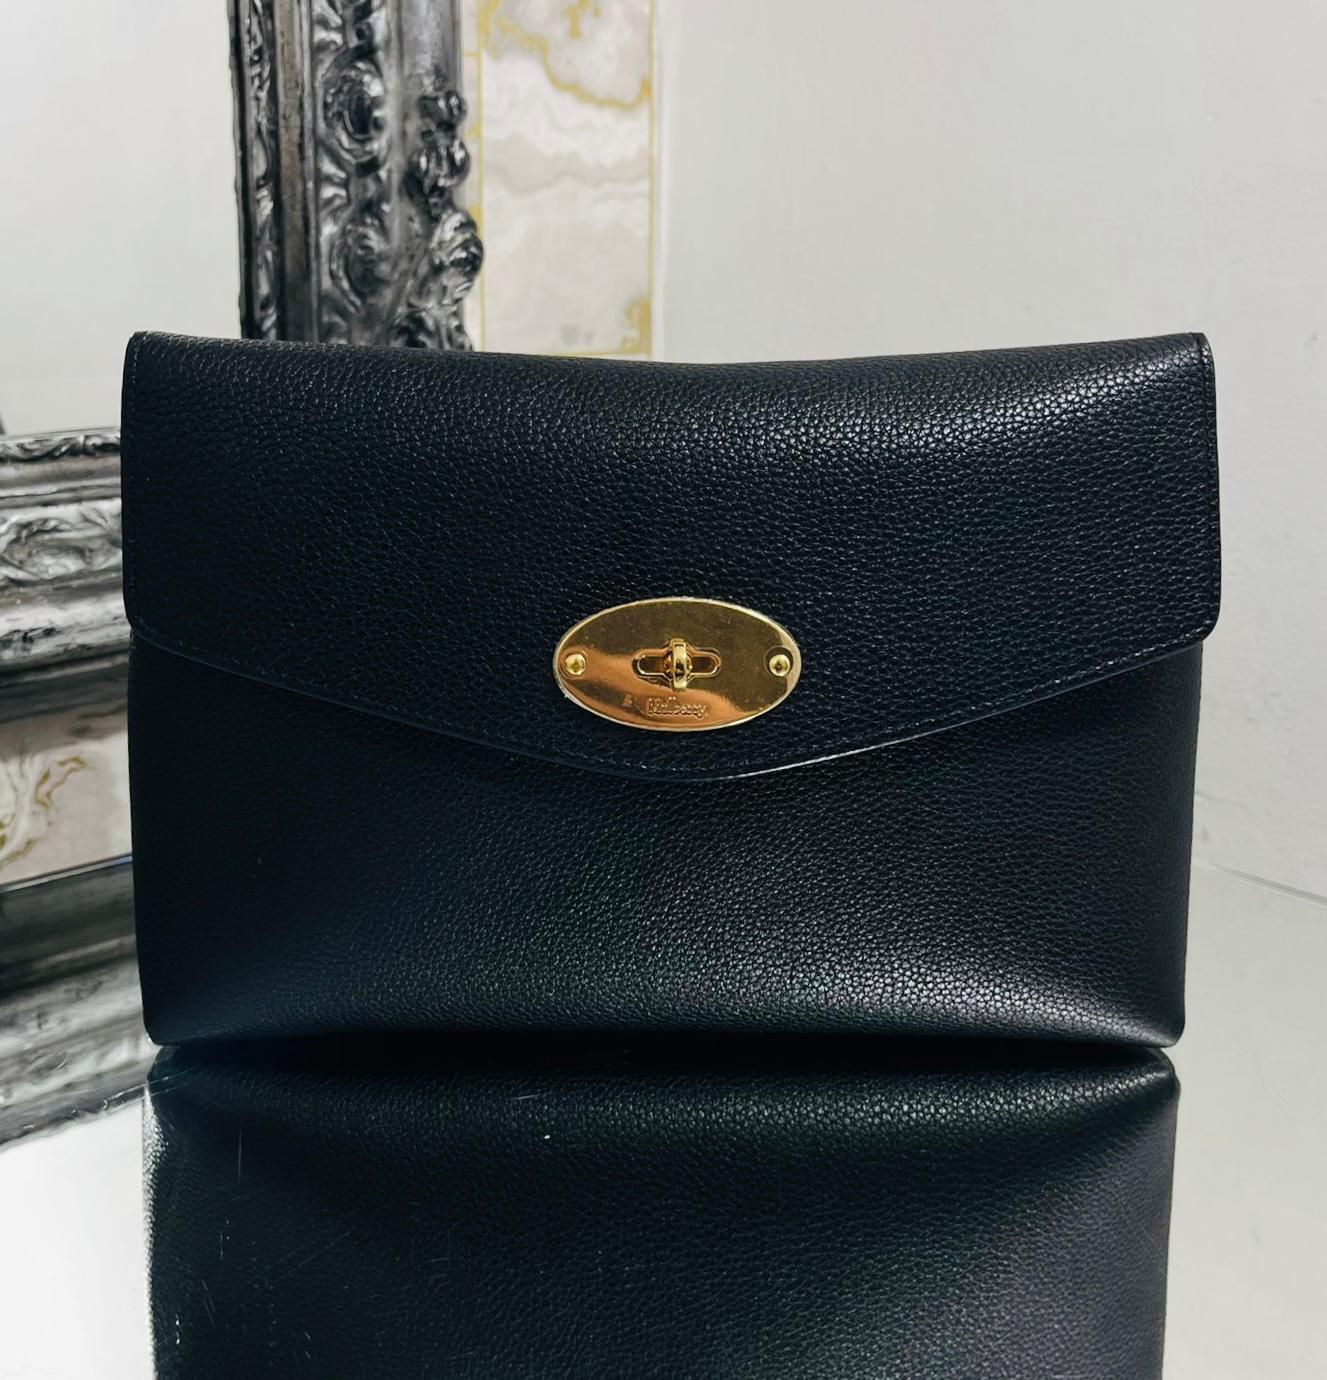 Mulberry Darley Leather Cosmetic Pouch

Black pouch crafted from the signature small classic grain leather.

Detailed with flap, iconic gold Postman's lock closure and leather interior.

Size – Height 17cm, Width 36cm, Depth 9cm

Condition – Very